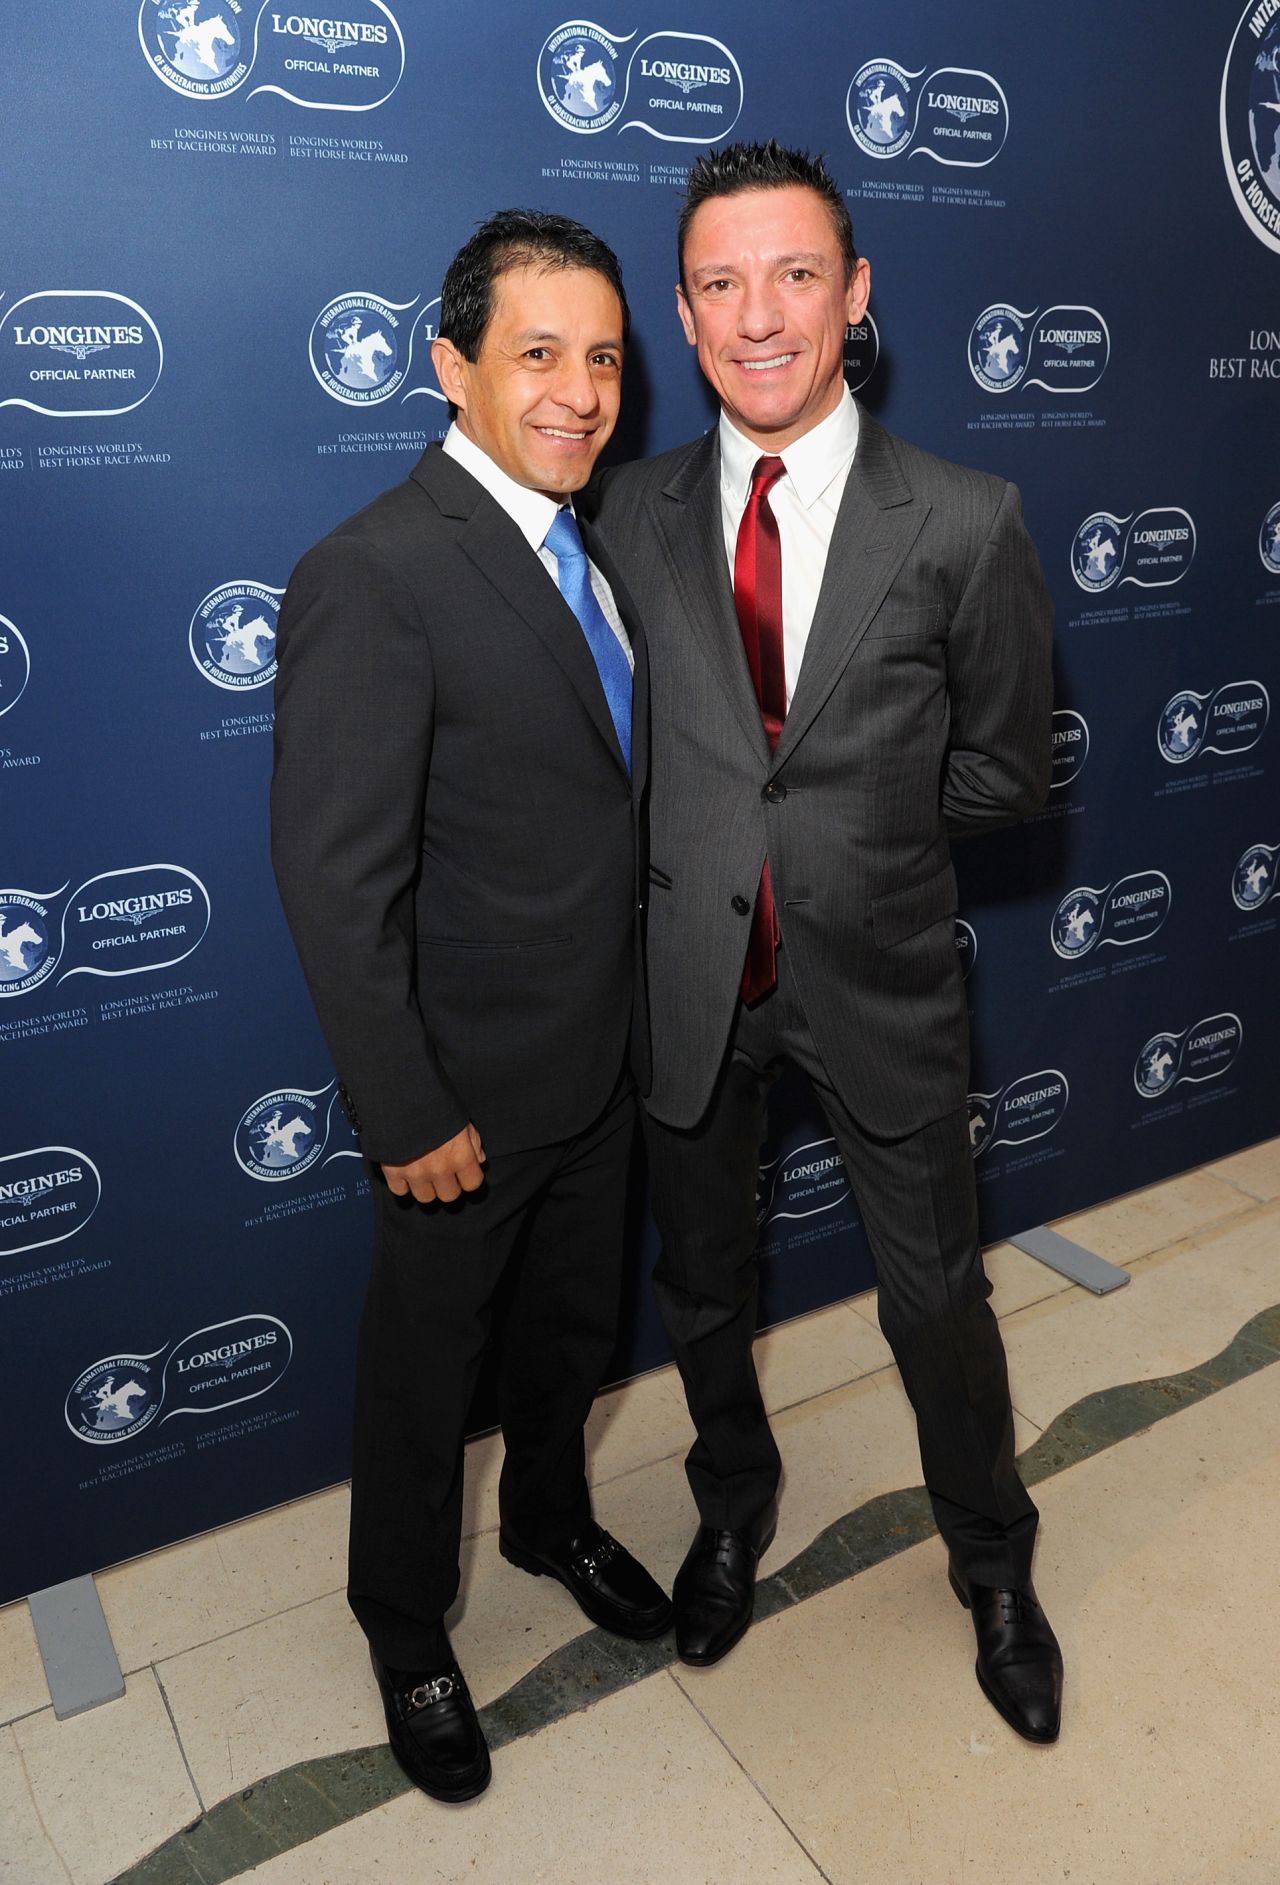 Victor Espinoza and Frankie Dettori pose for a photo at the he Longines World's Best Racehorse  Awards. Dettori had a stellar year in the saddle piloting Golden Horn to victory in the Epsom Derby and the Prix de l'Arc de Triomphe in 2015. "My best year since 1996," Dettori told CNN.